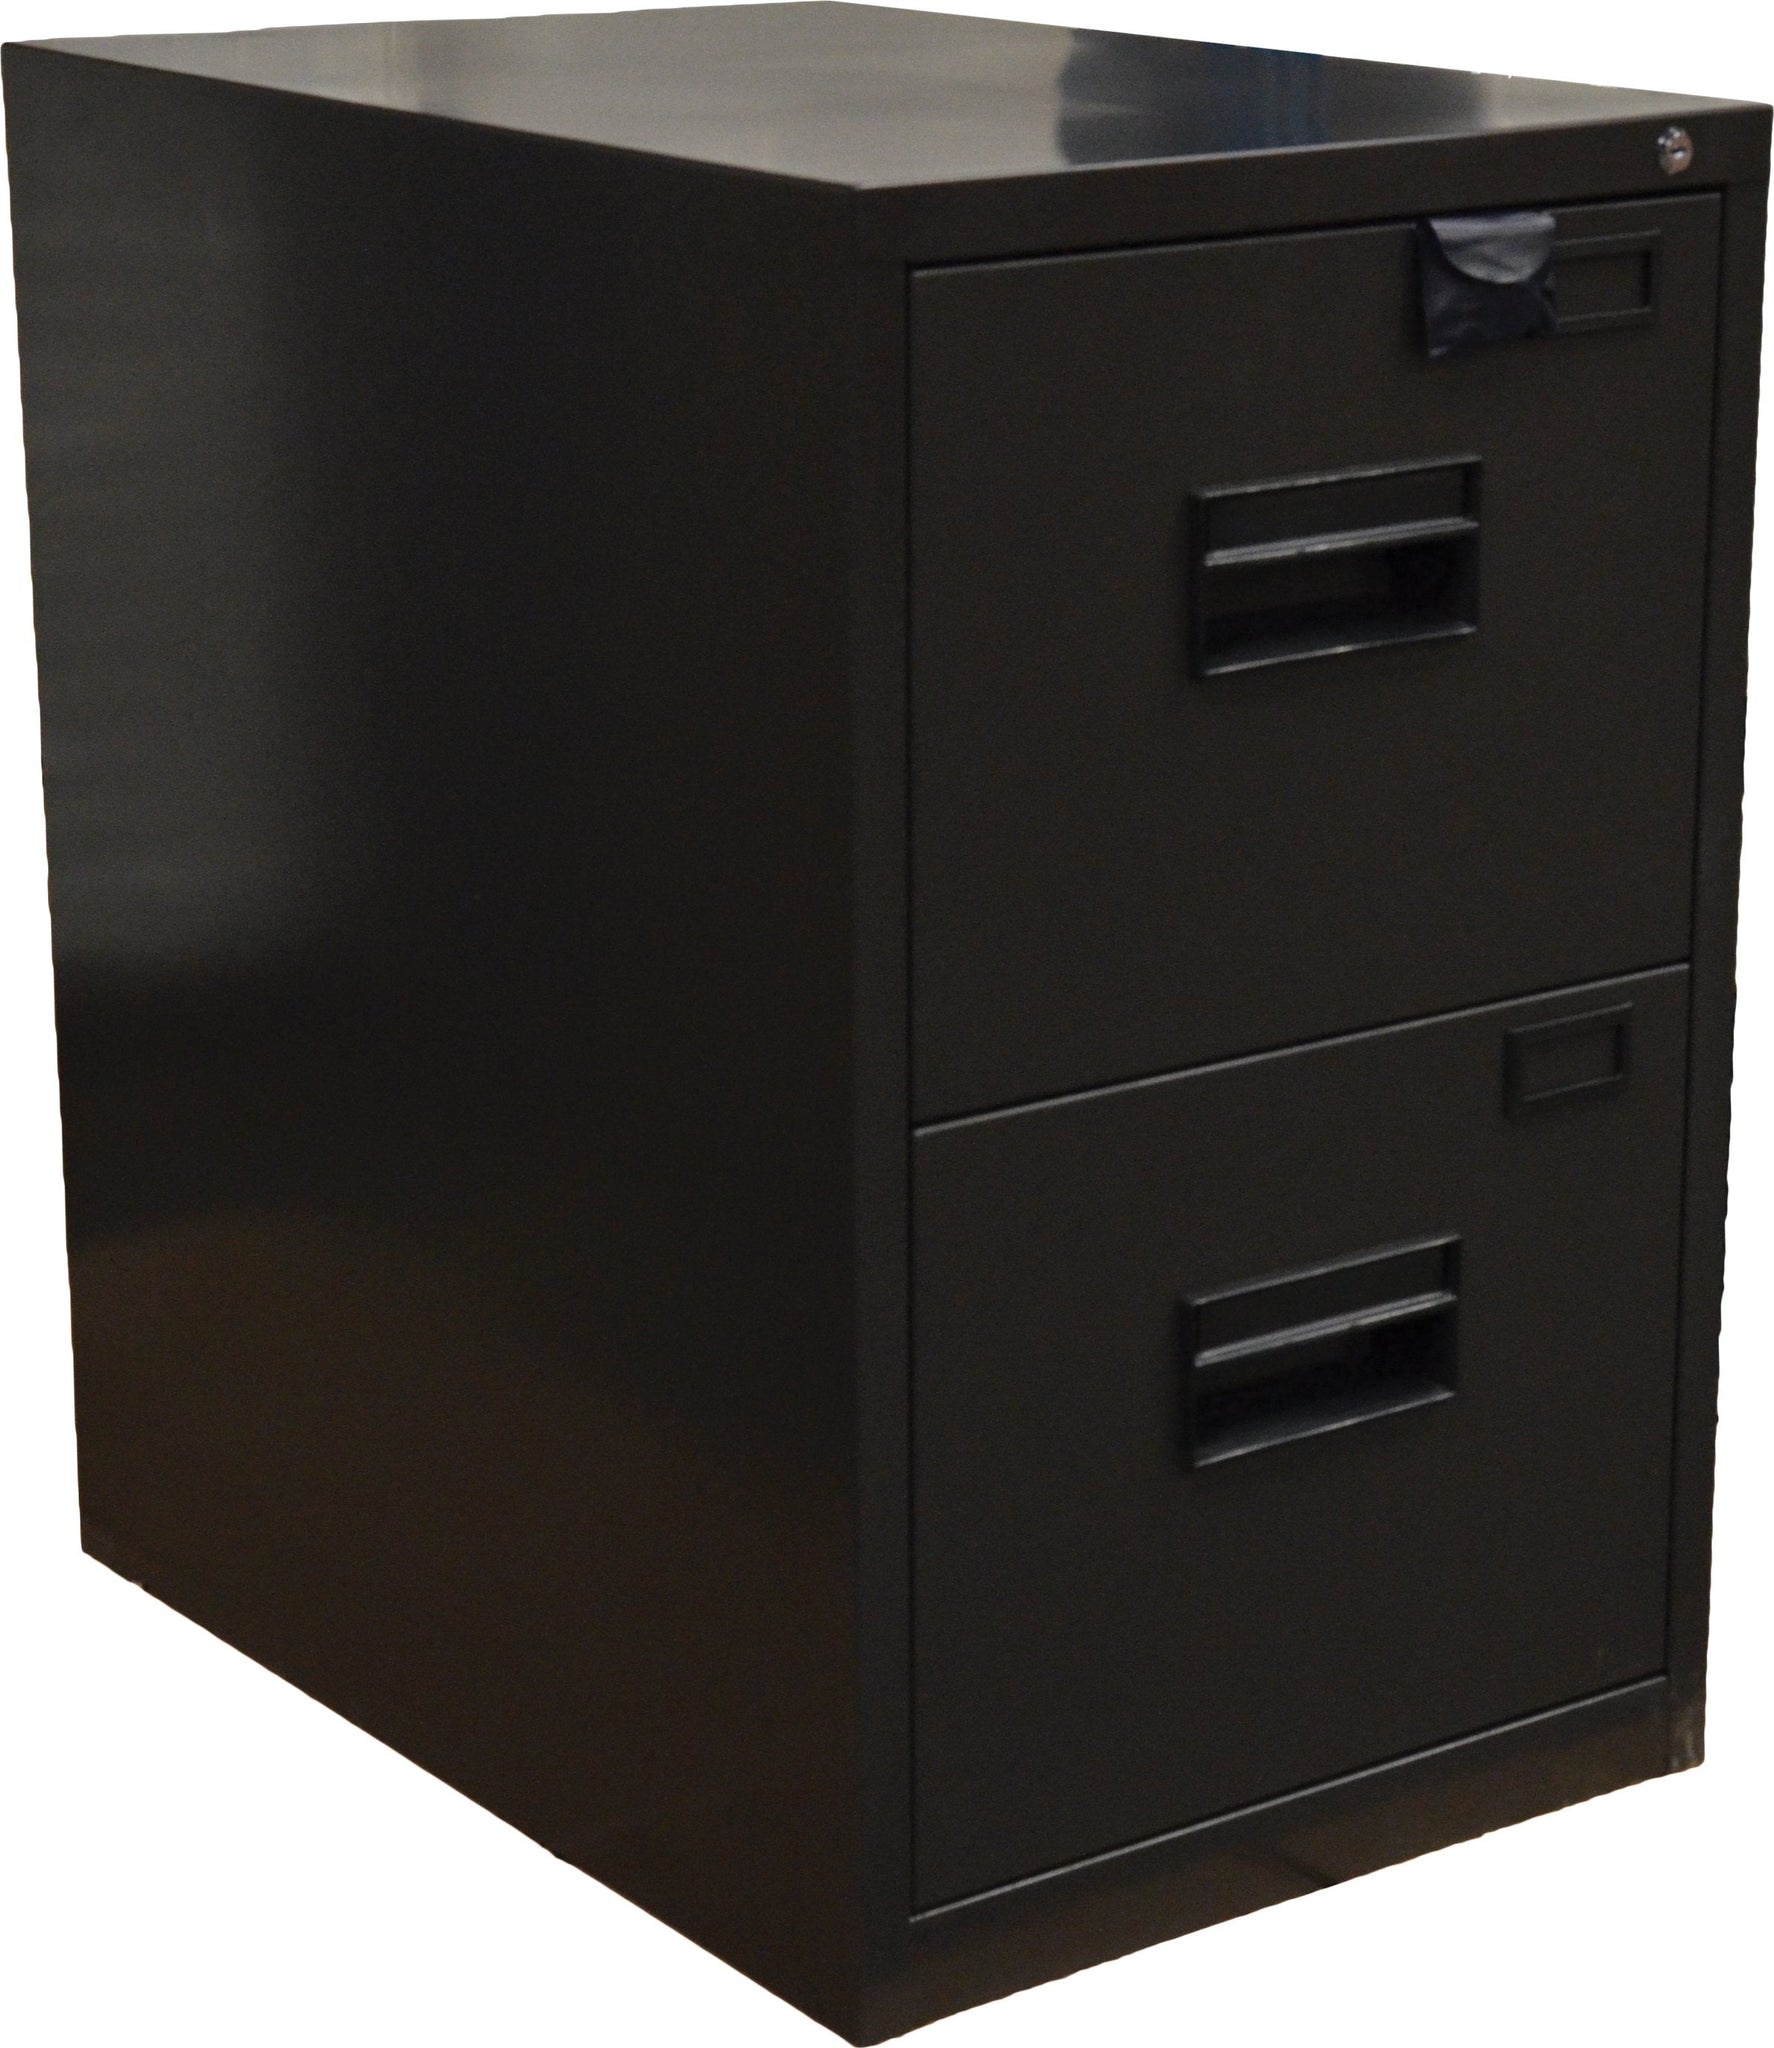 Omcan - Charcoal Black Vertical Legal File Cabinet with Two Drawers - 13073